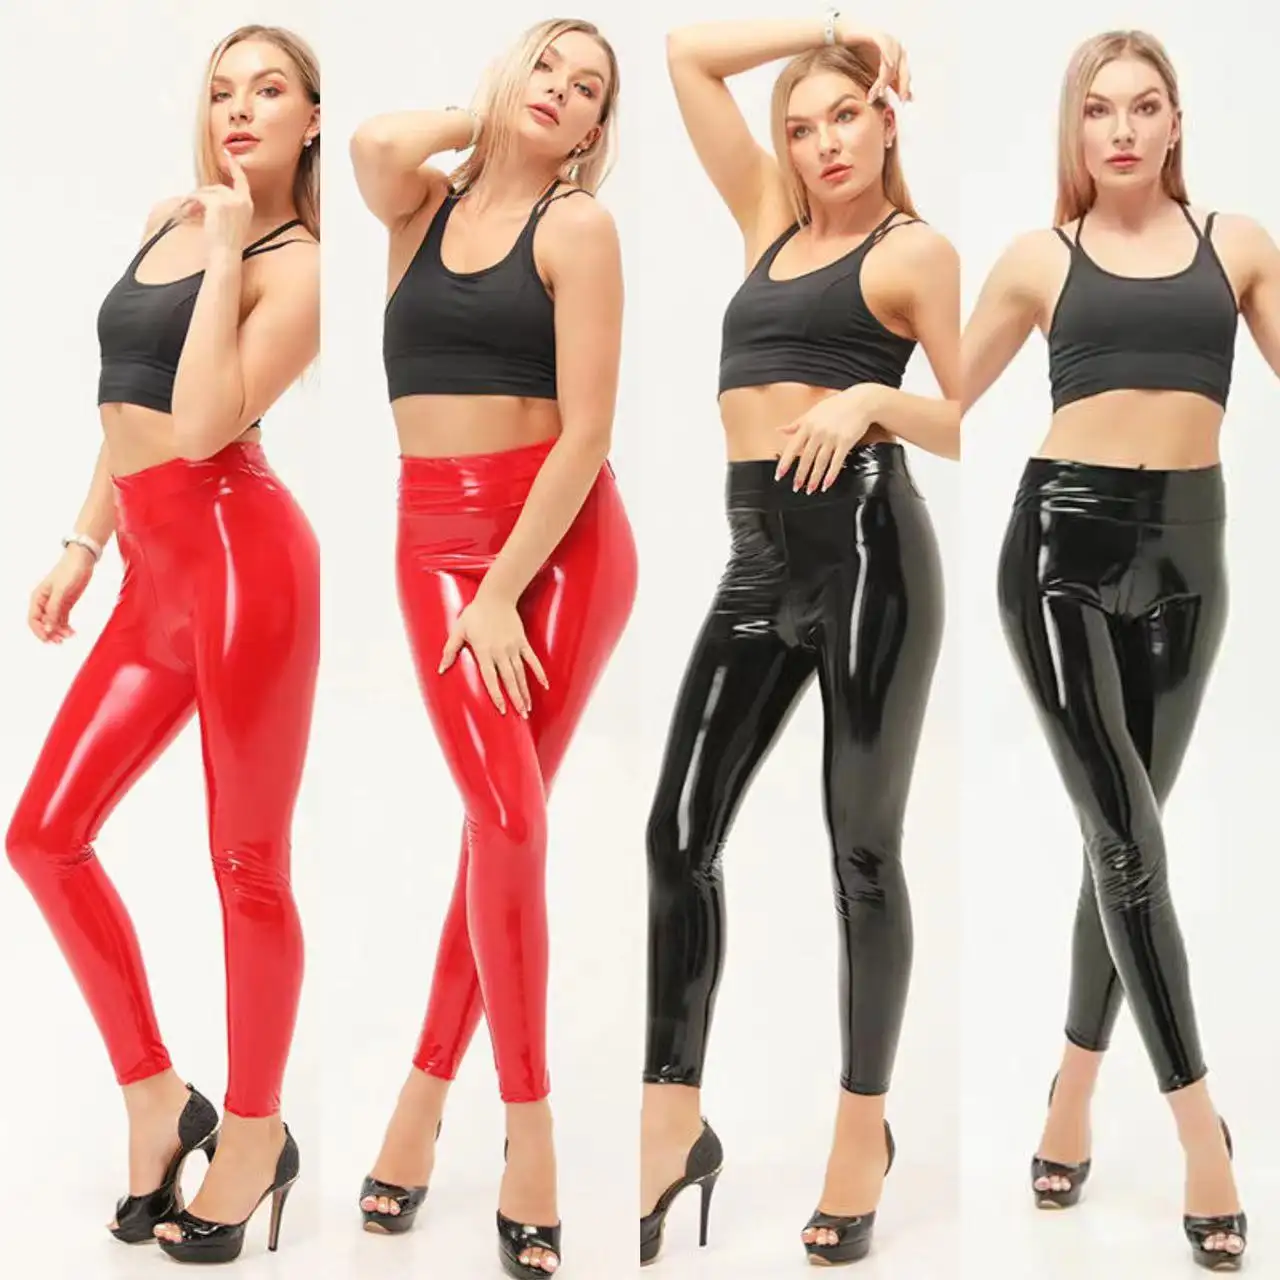 High Waisted Black Leggings Push Up For Women Sexy Tights Woman Legging Manufacturer Compression Leather Push Up Women'S Legging